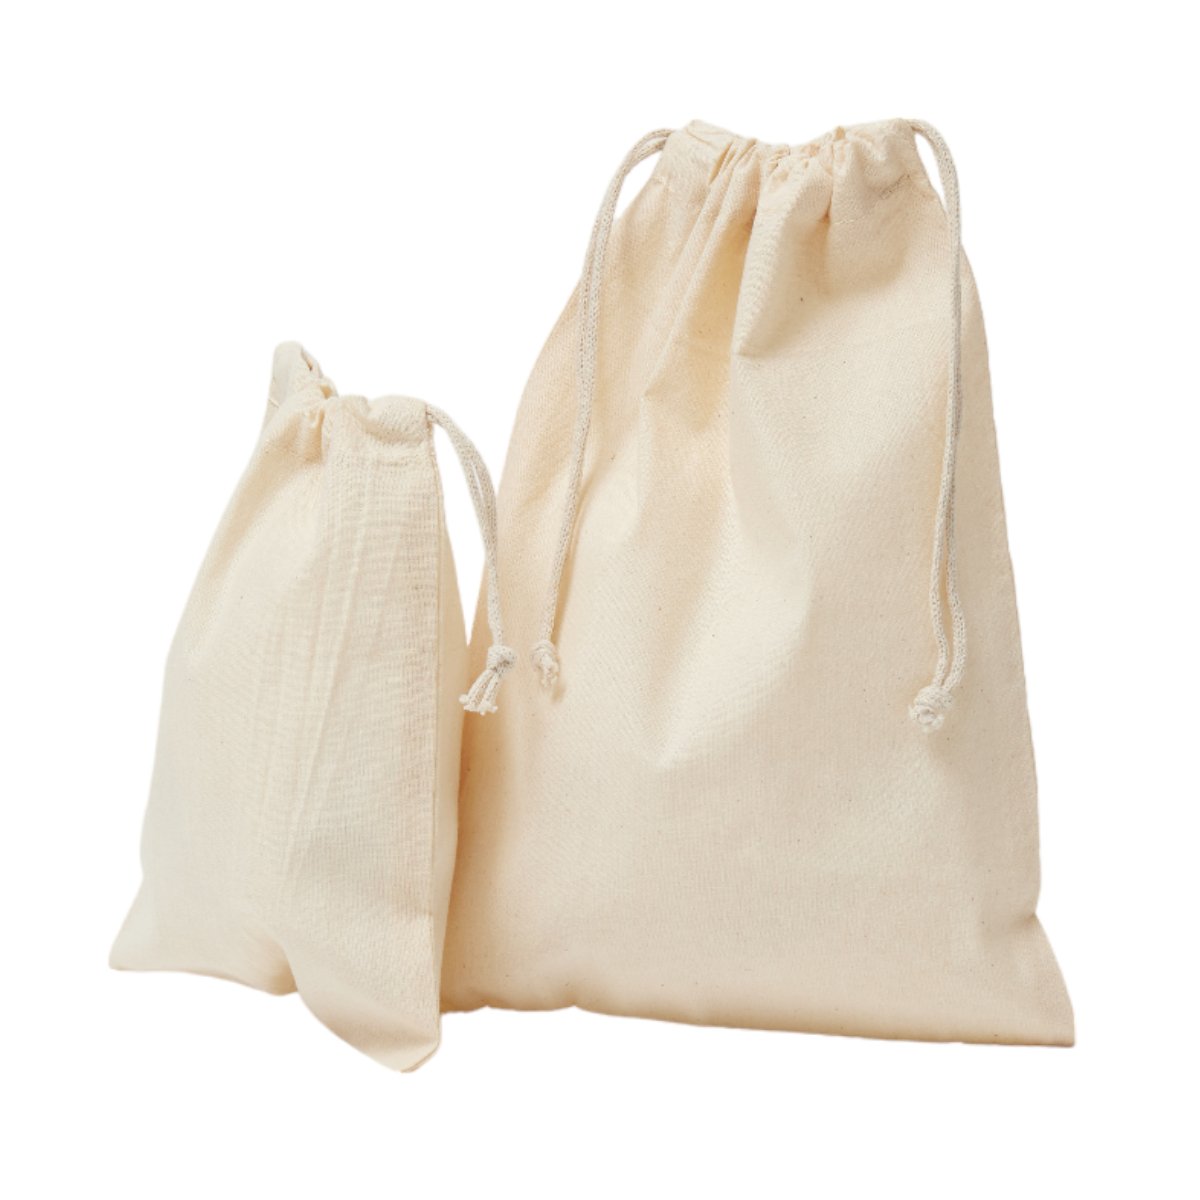 Express Value Calico Drawstring Bags (Plain or Printed) - PackQueen